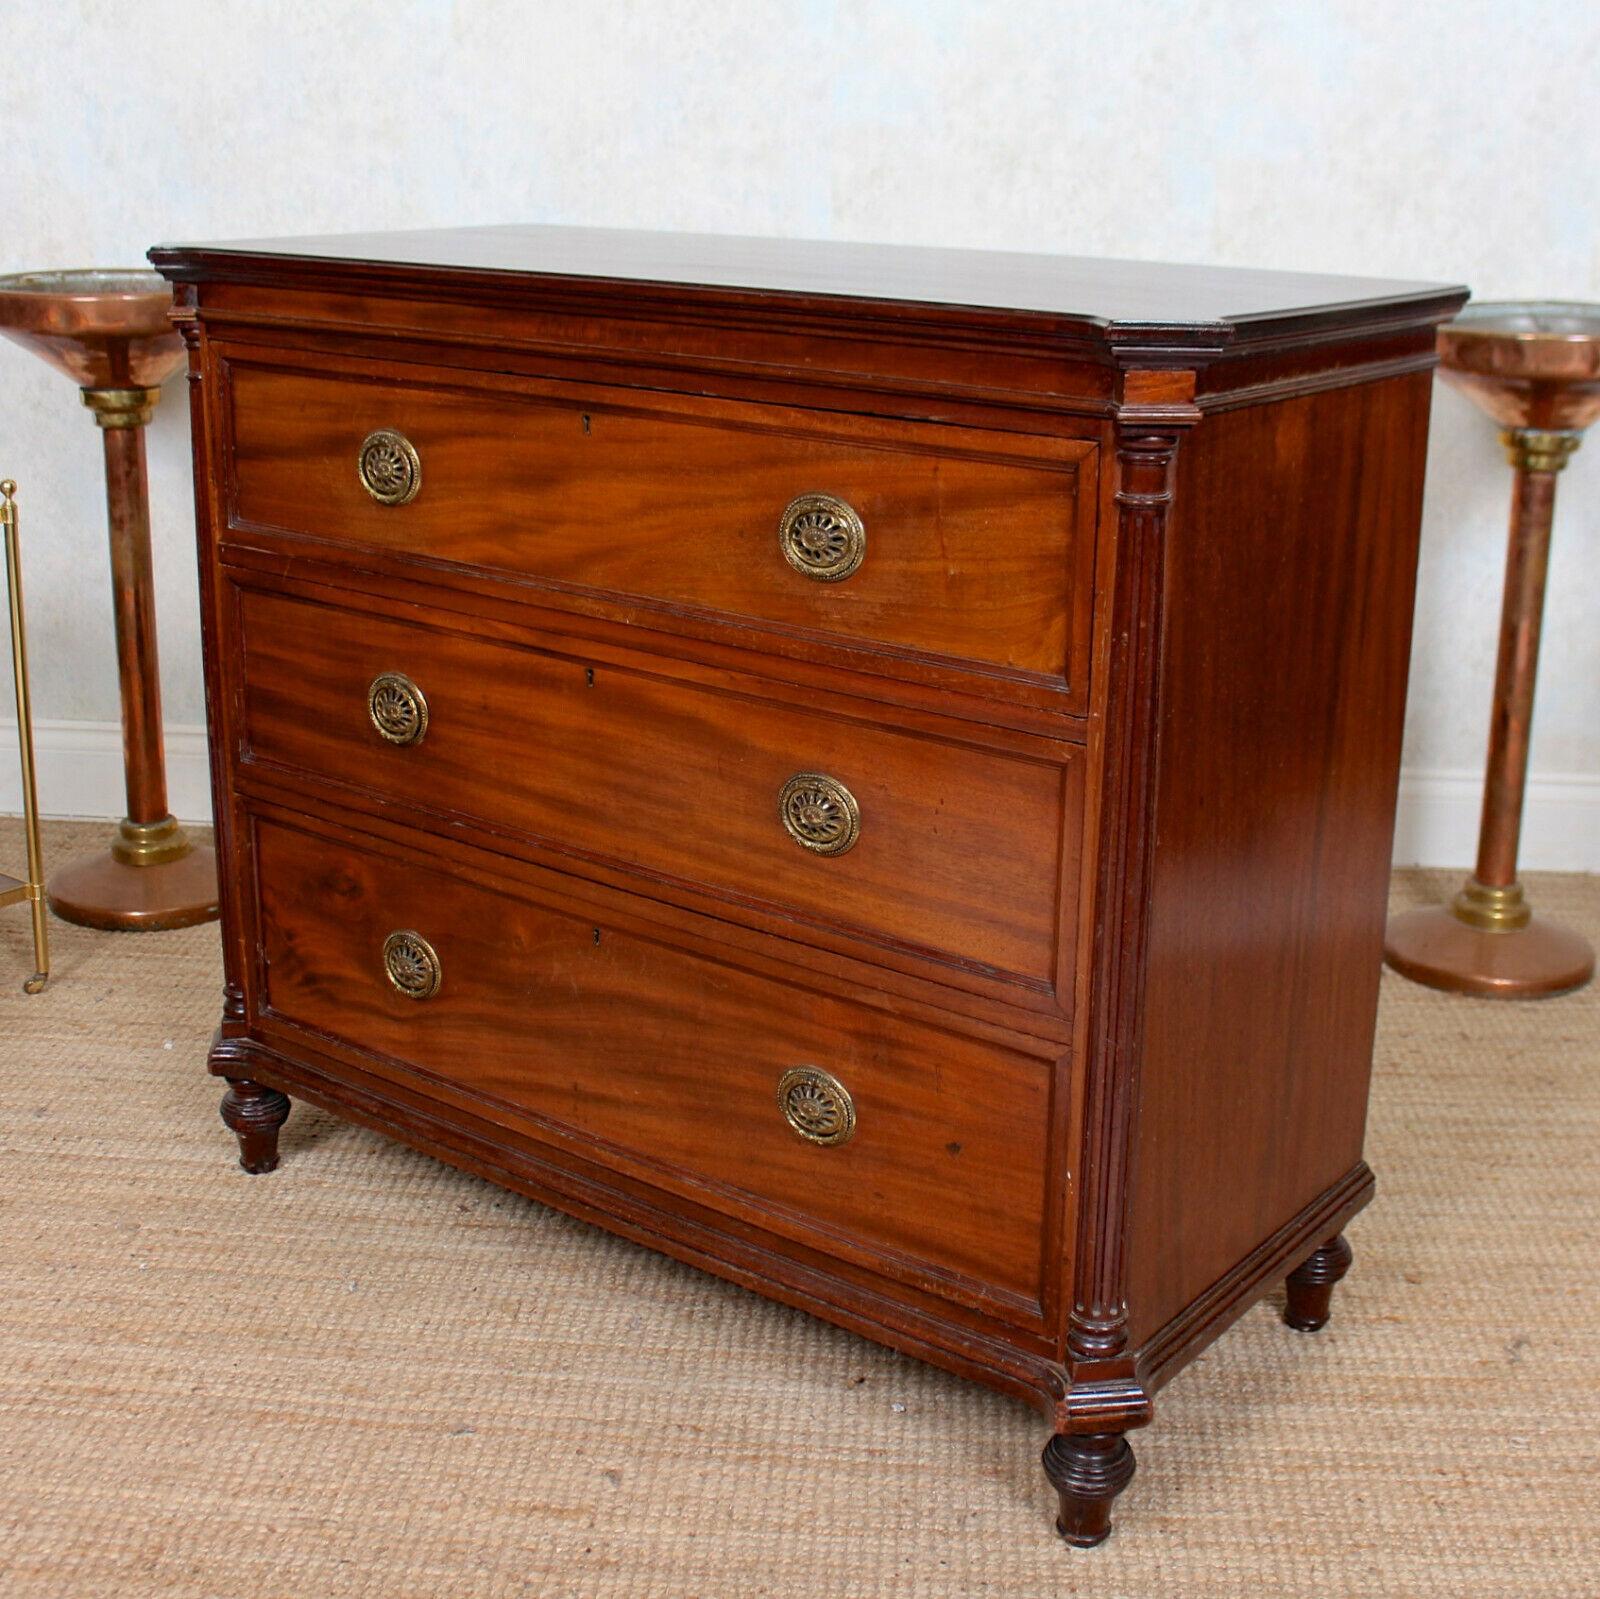 An impressive late 19th century Cuban mahogany chest of drawers by Hindley & Wilkinson of London.
The top with outswept canted corners incoporating the fluted pilasters below which in turn flank three long graduated Cuban mahogany drawers mounted